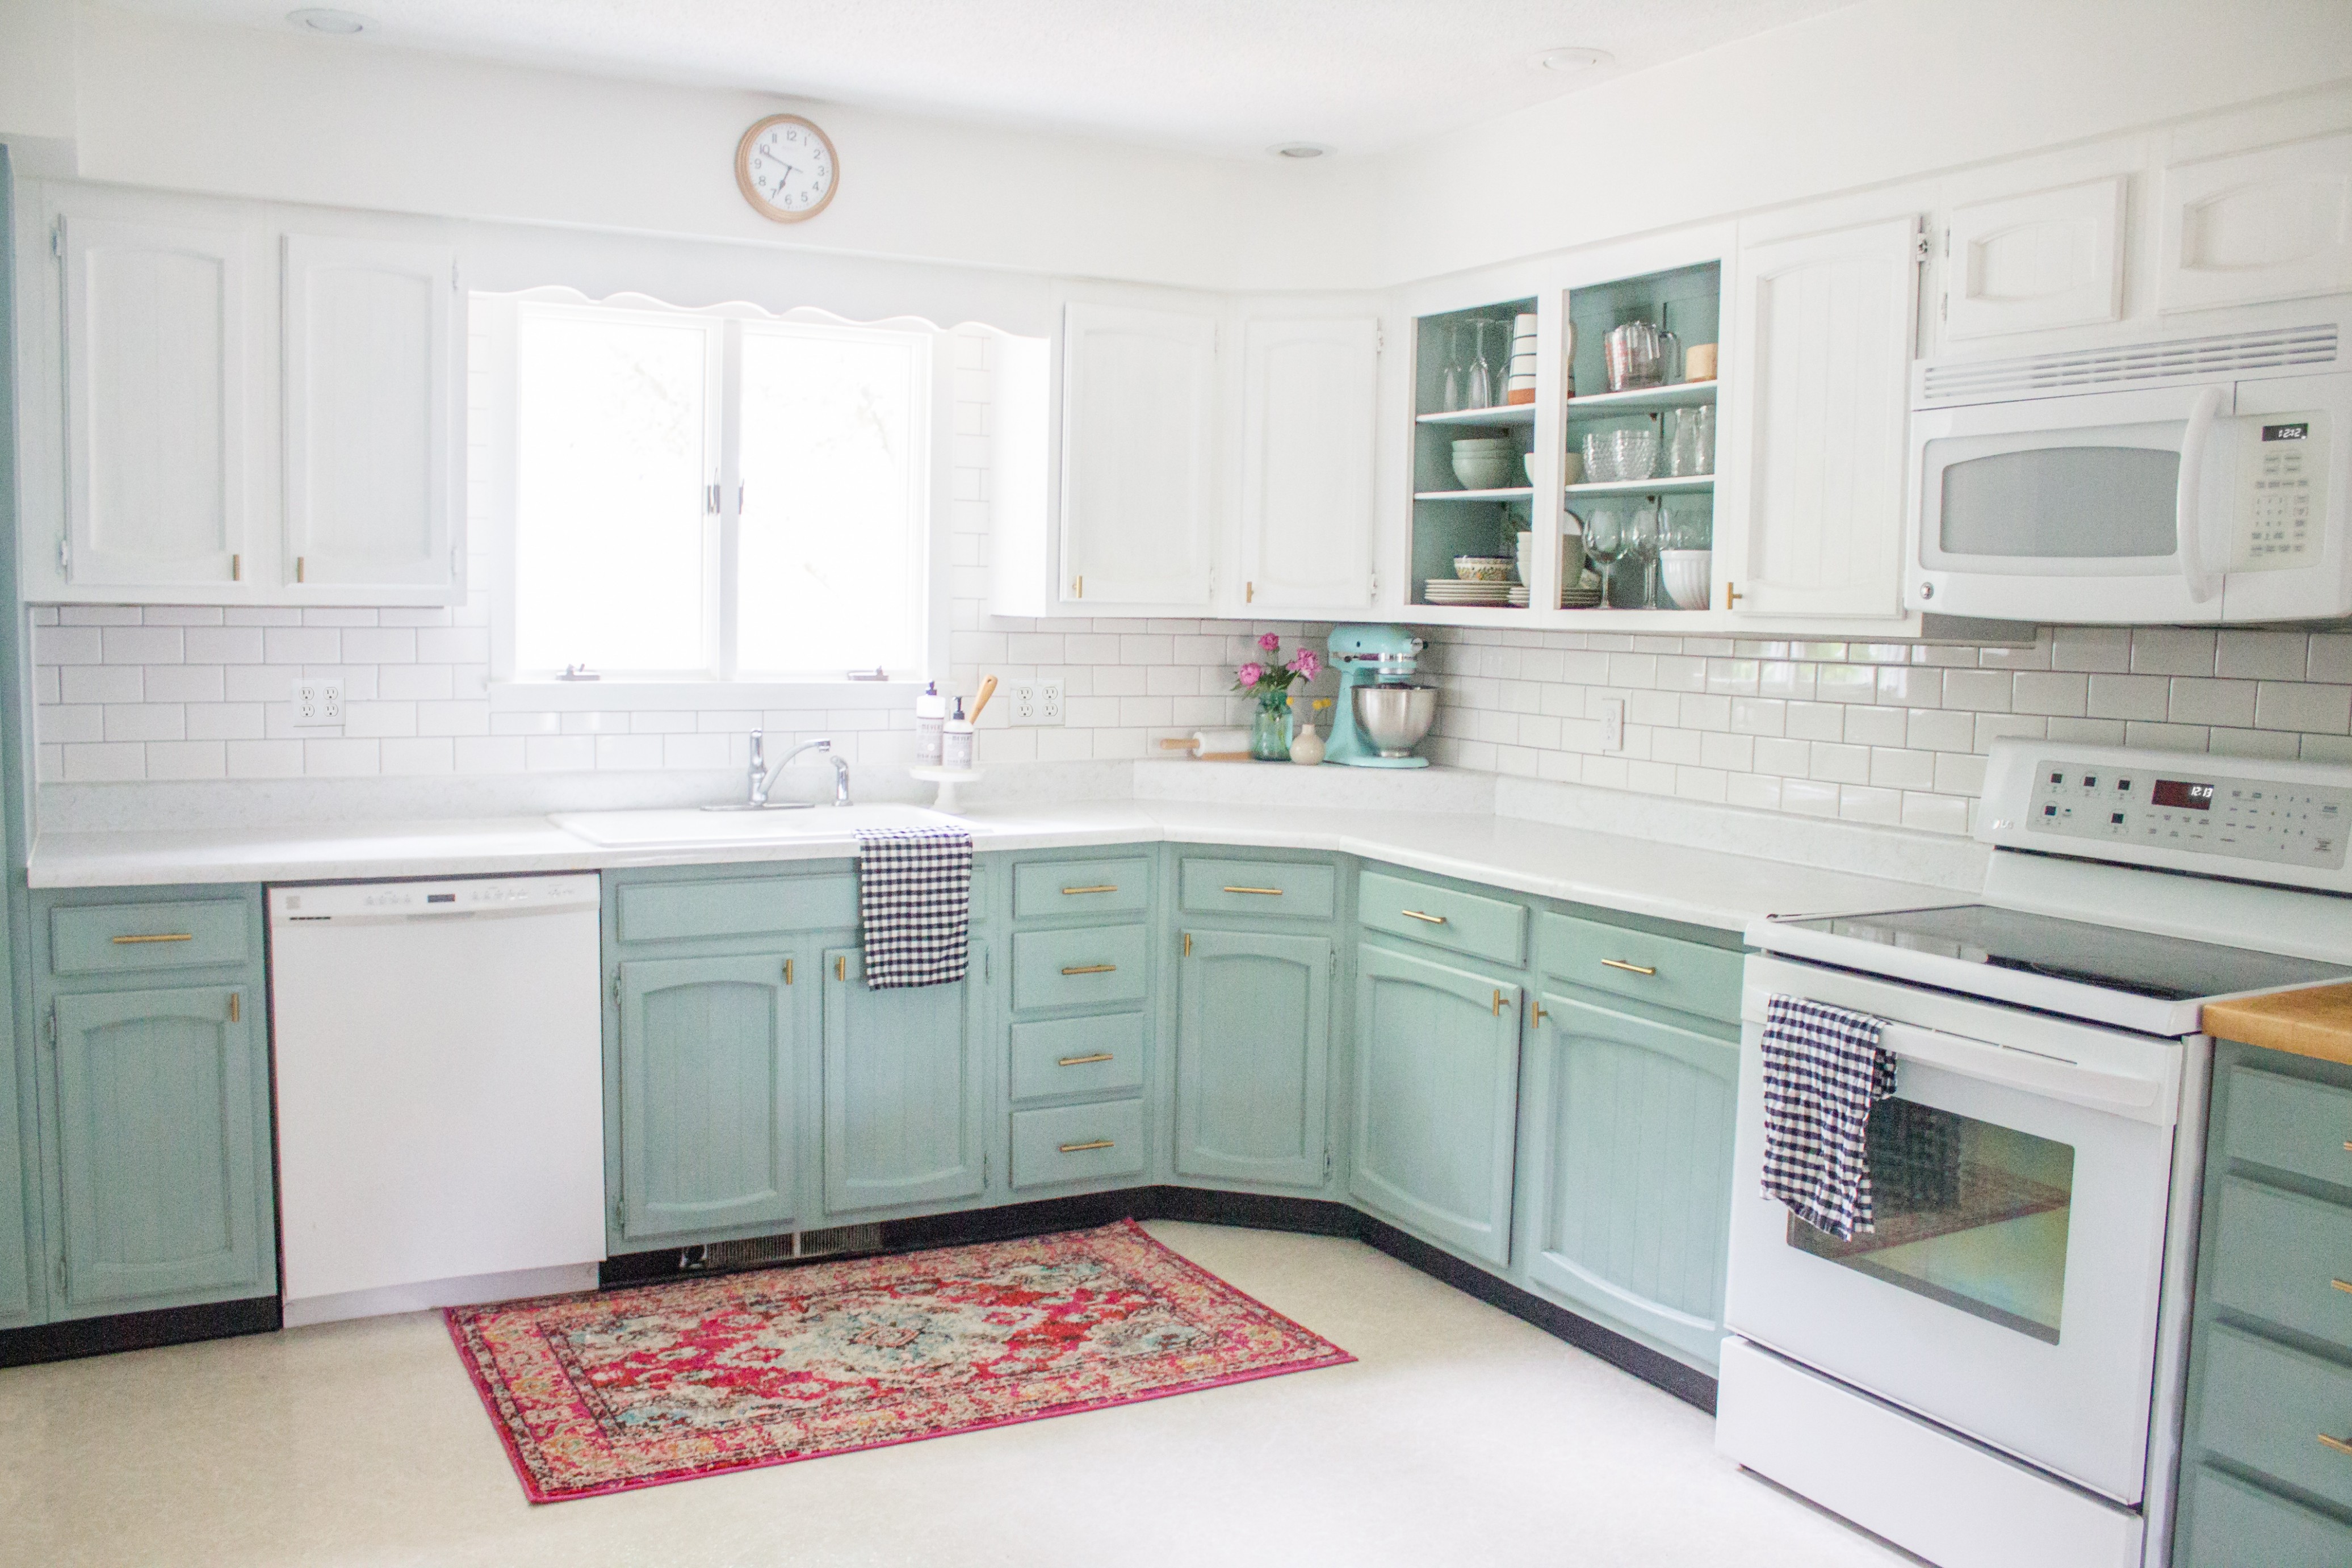 Chalk Painted Kitchen Cabinets Two Years Later | Holland Avenue Home Oil Based Paint Over Chalk Paint